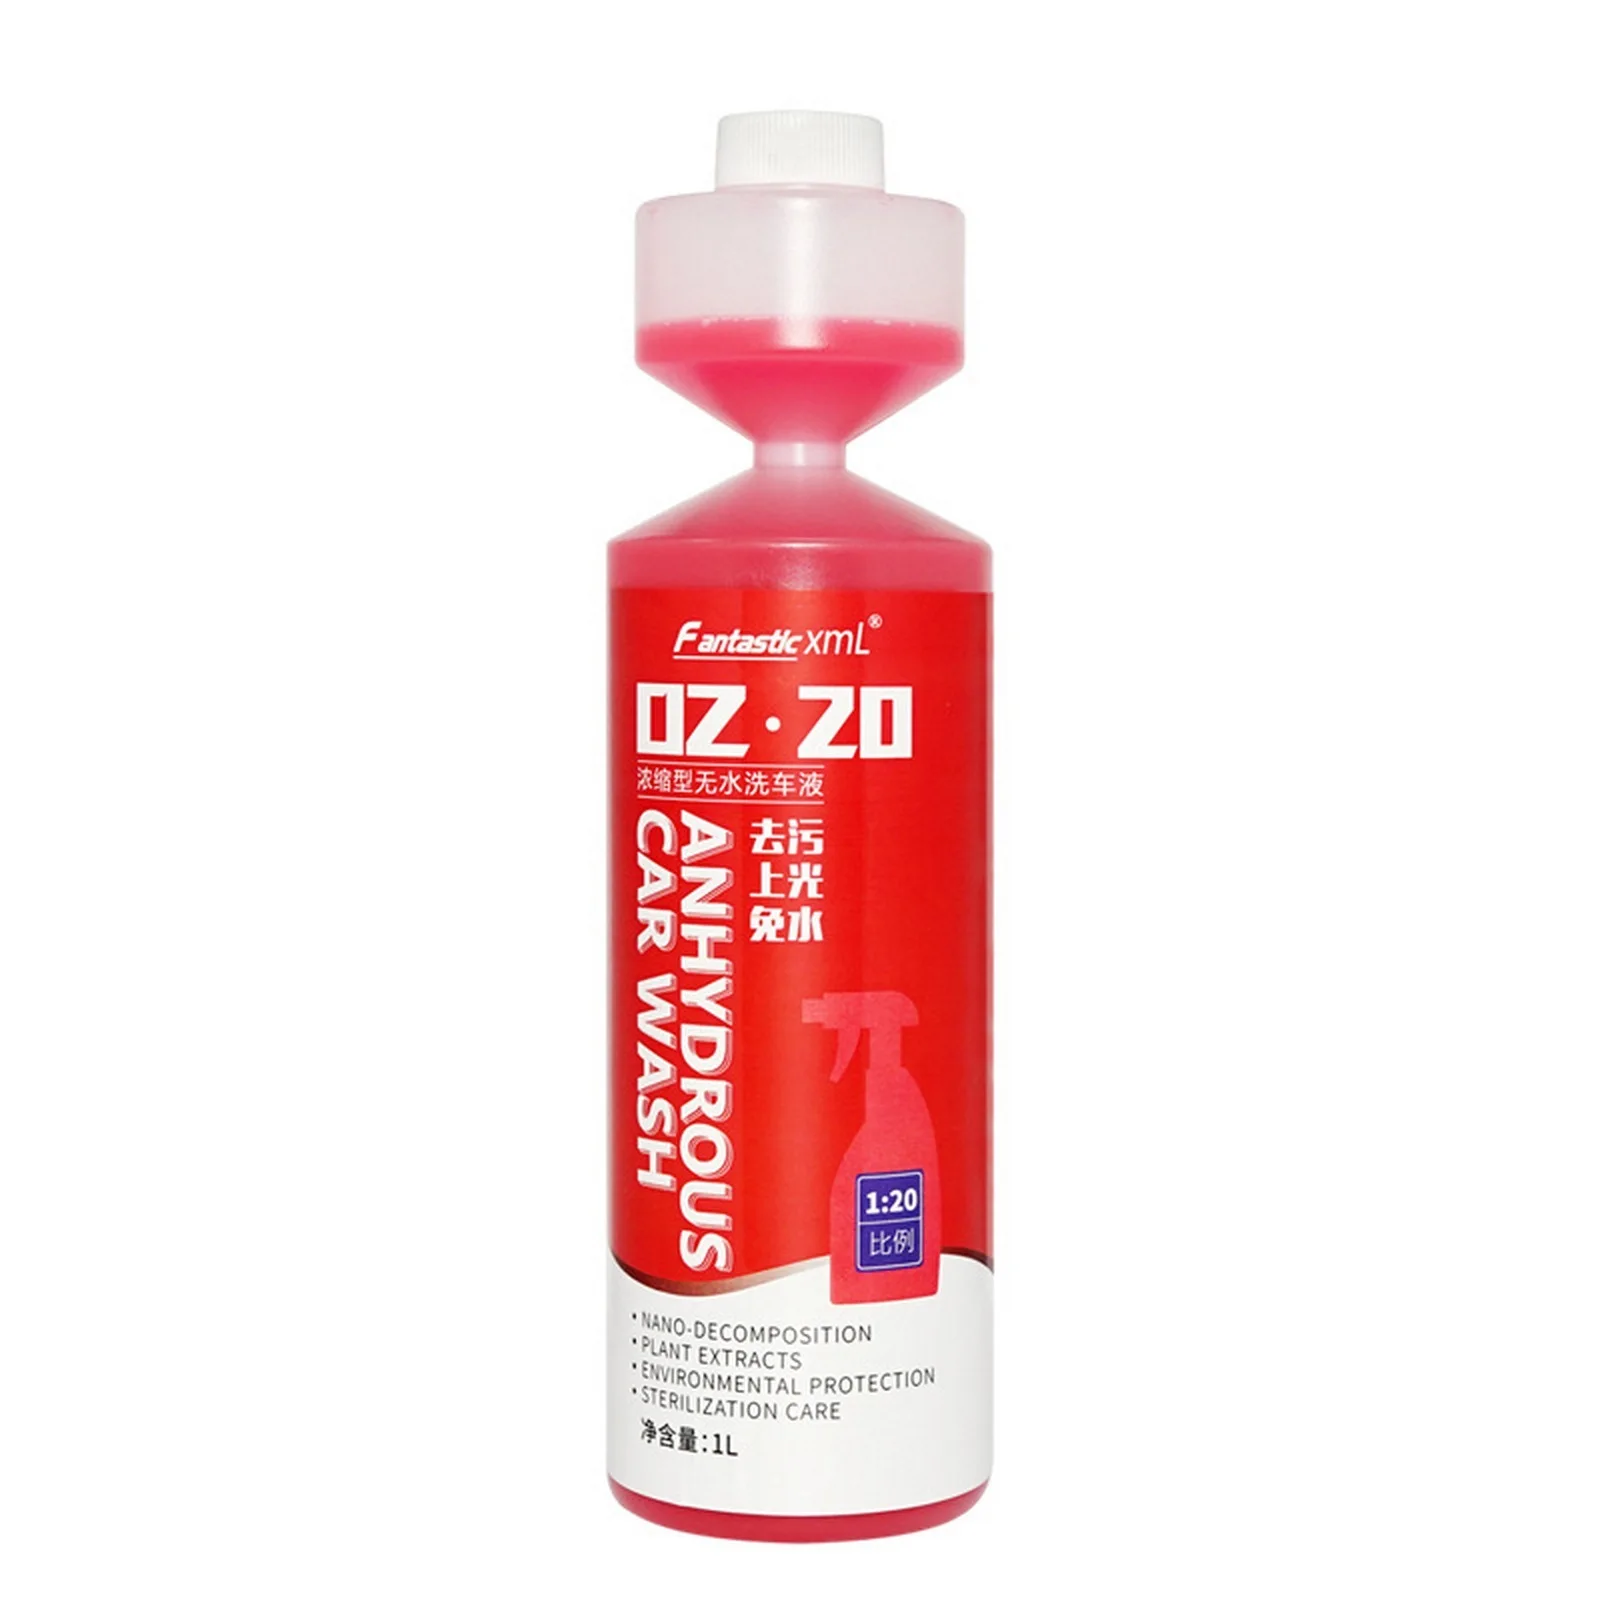 

33.8 Fl.oz Car Cleaner 1L High Concentration Anhydrous Detergent 1:20 Car Polish Cleaner Wipe Clean Car Wash Tool Polish